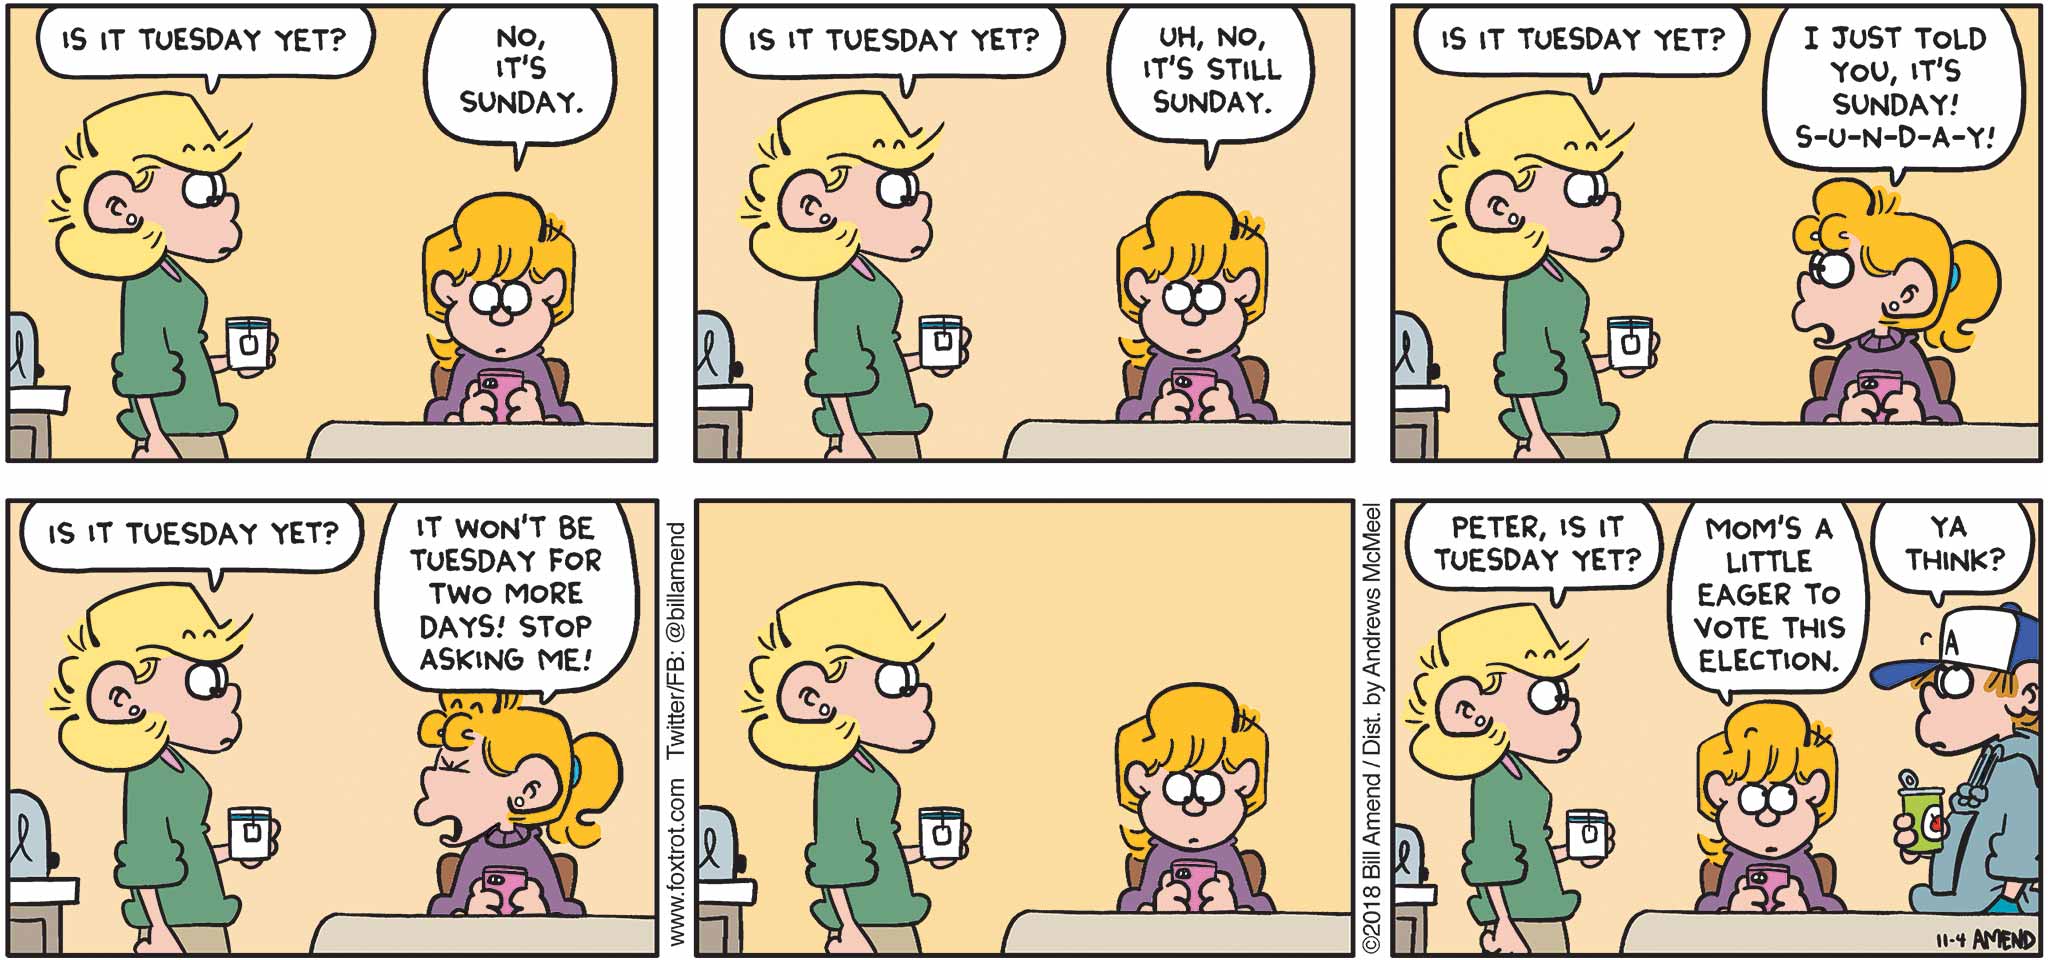 FoxTrot by Bill Amend - "Tuesday" published November 4, 2018 - Andy says: Is it Tuesday yet? Paige says: No, it's Sunday. Andy says: Is it Tuesday yet? Paige says: Uh, no, it's still Sunday. Andy says: Is it Tuesday yet? Paige says: I just told you, it's Sunday! S-U-N-D-A-Y! Andy says: Is it Tuesday yet? Paige says: It won't be Tuesday for two more days! Stop asking me! Andy says: Peter, is it Tuesday yet? Paige says: Mom's a little eager to vote this election. Peter says: Ya think?